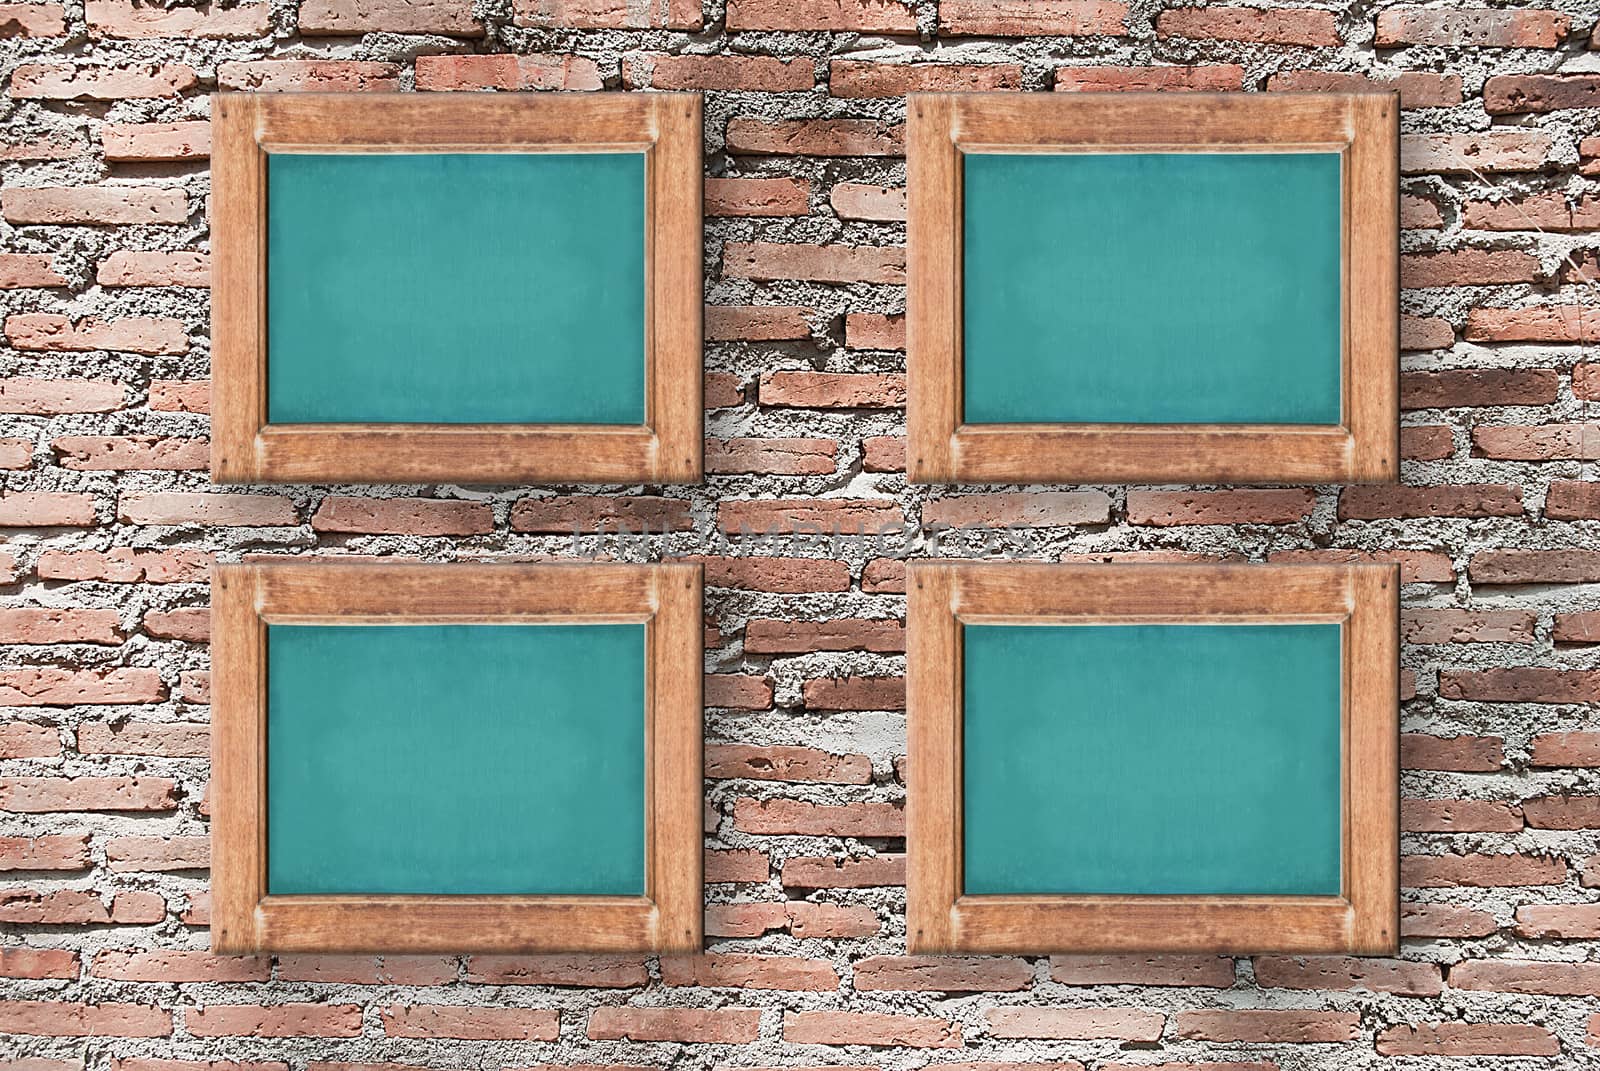 Image of chalkboard on brick wall texture, background for design by rakoptonLPN